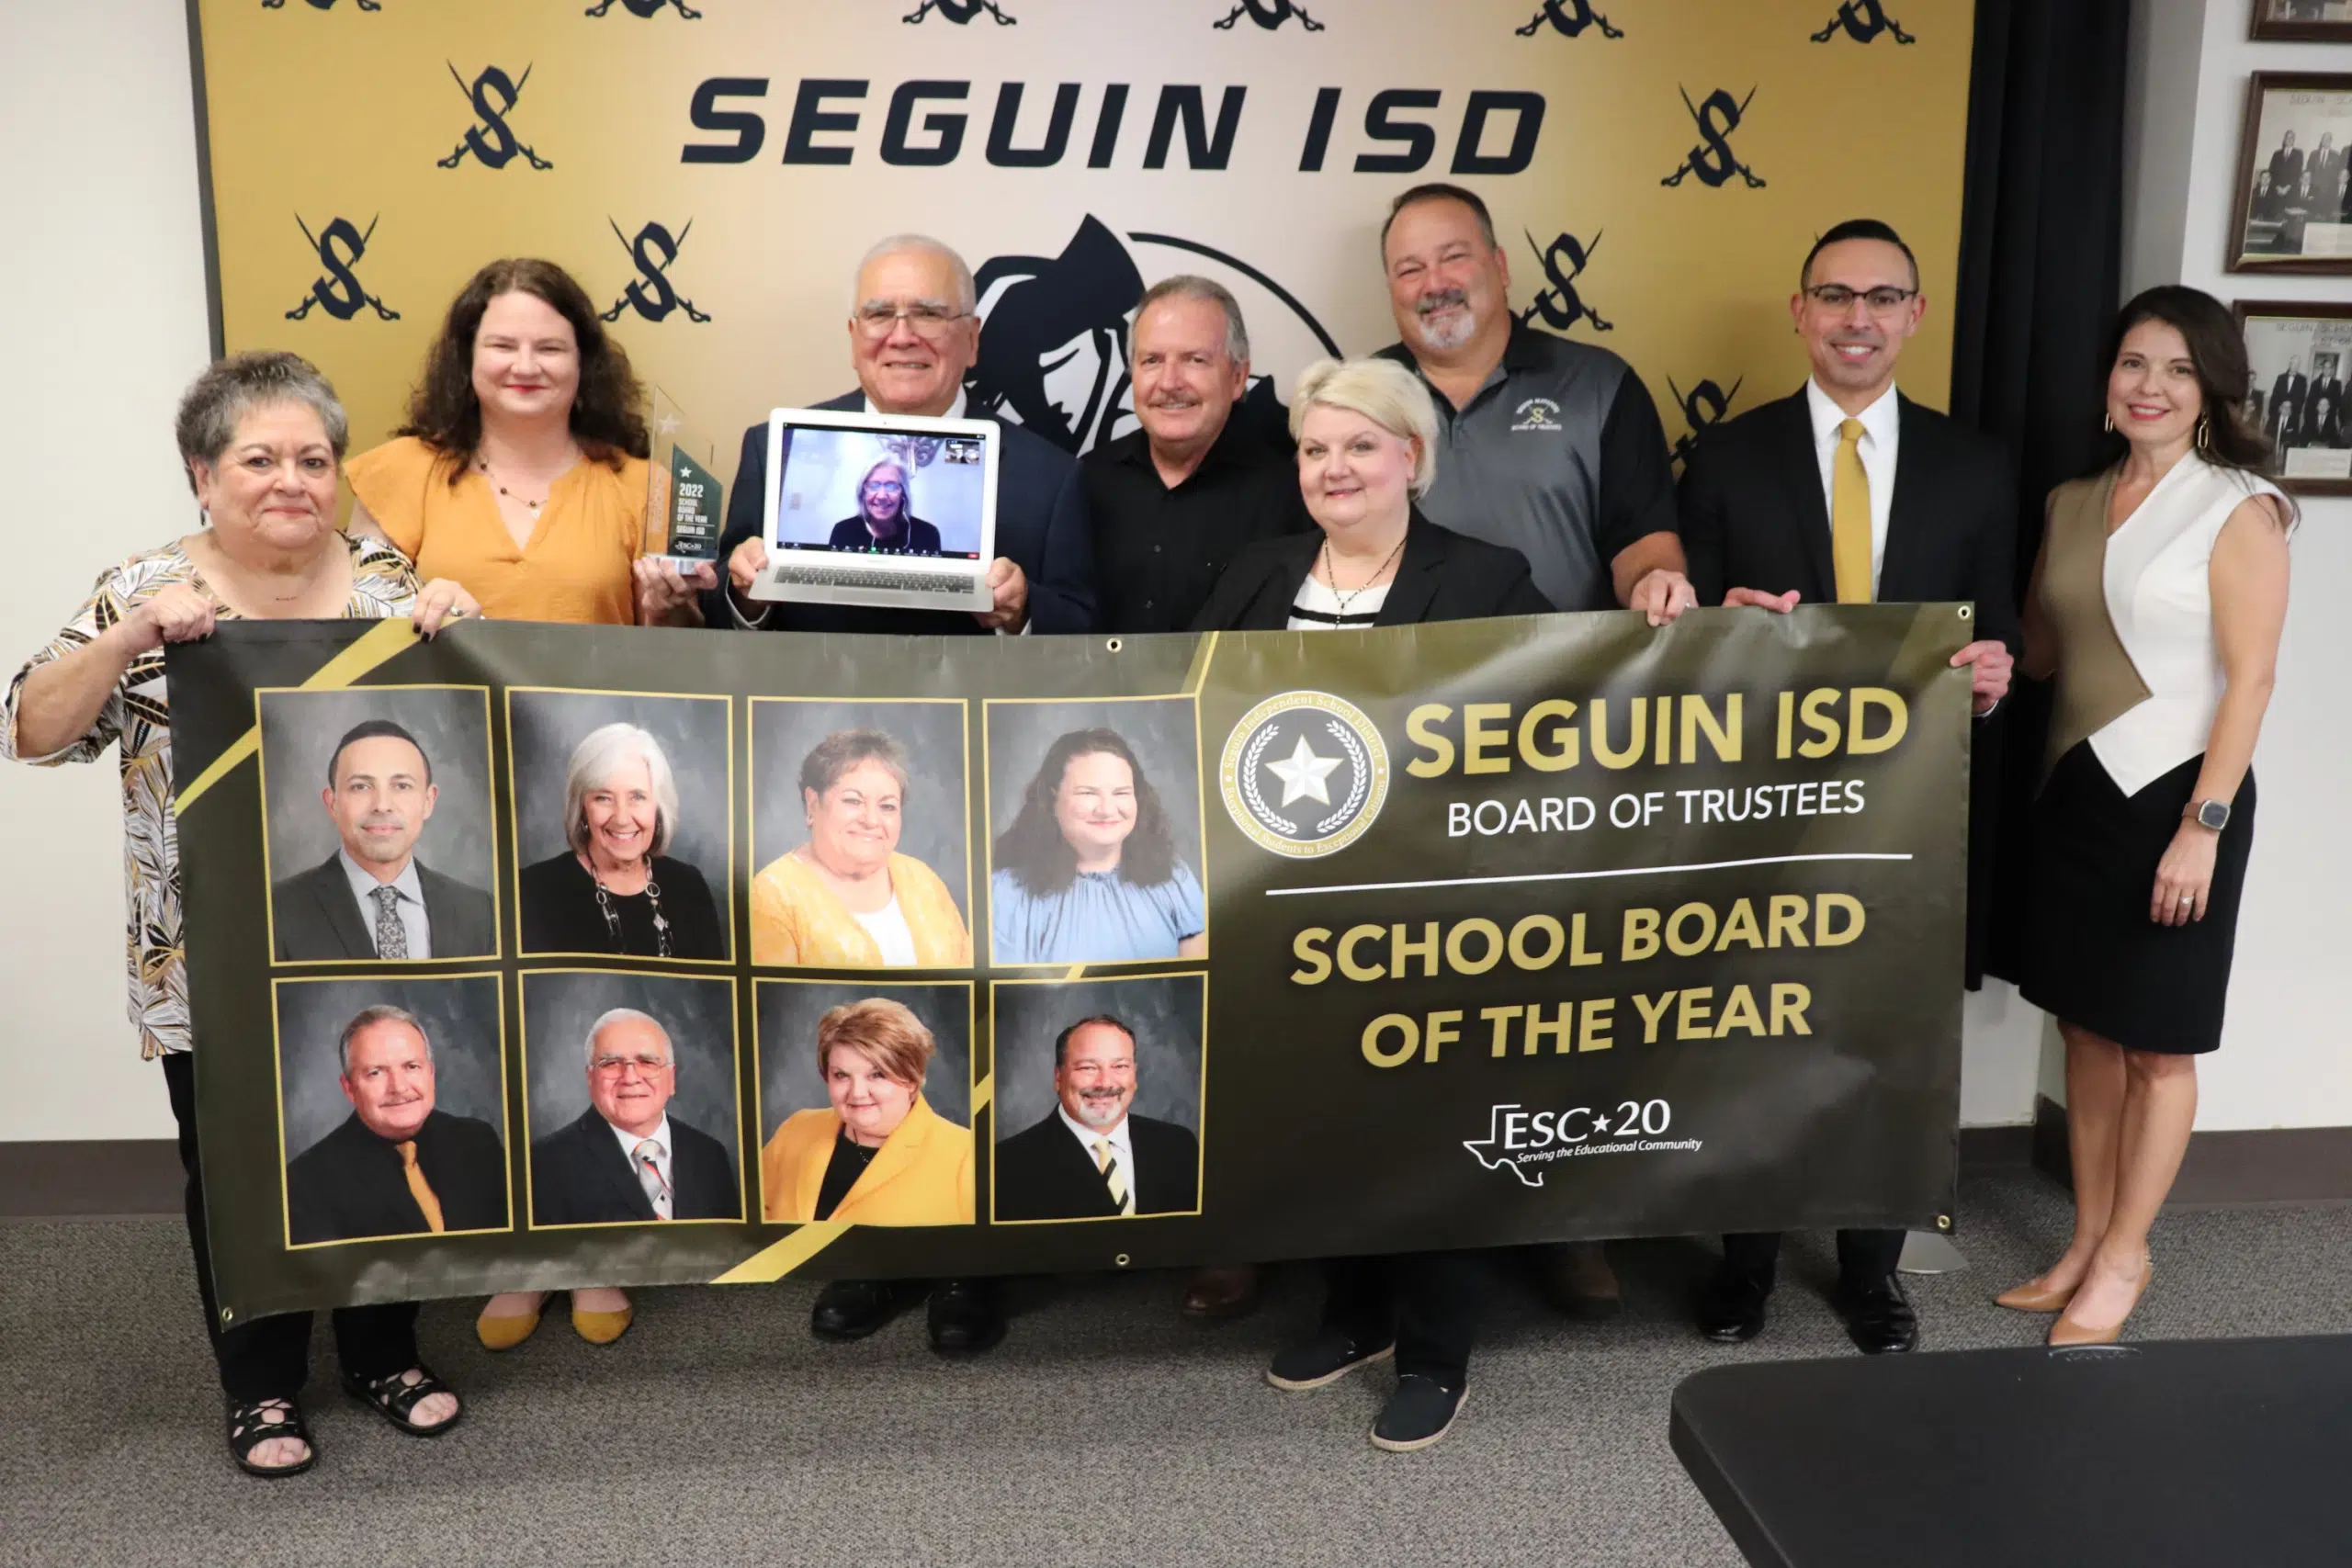 Seguin ISD officially recognized as one of the top school boards in Texas